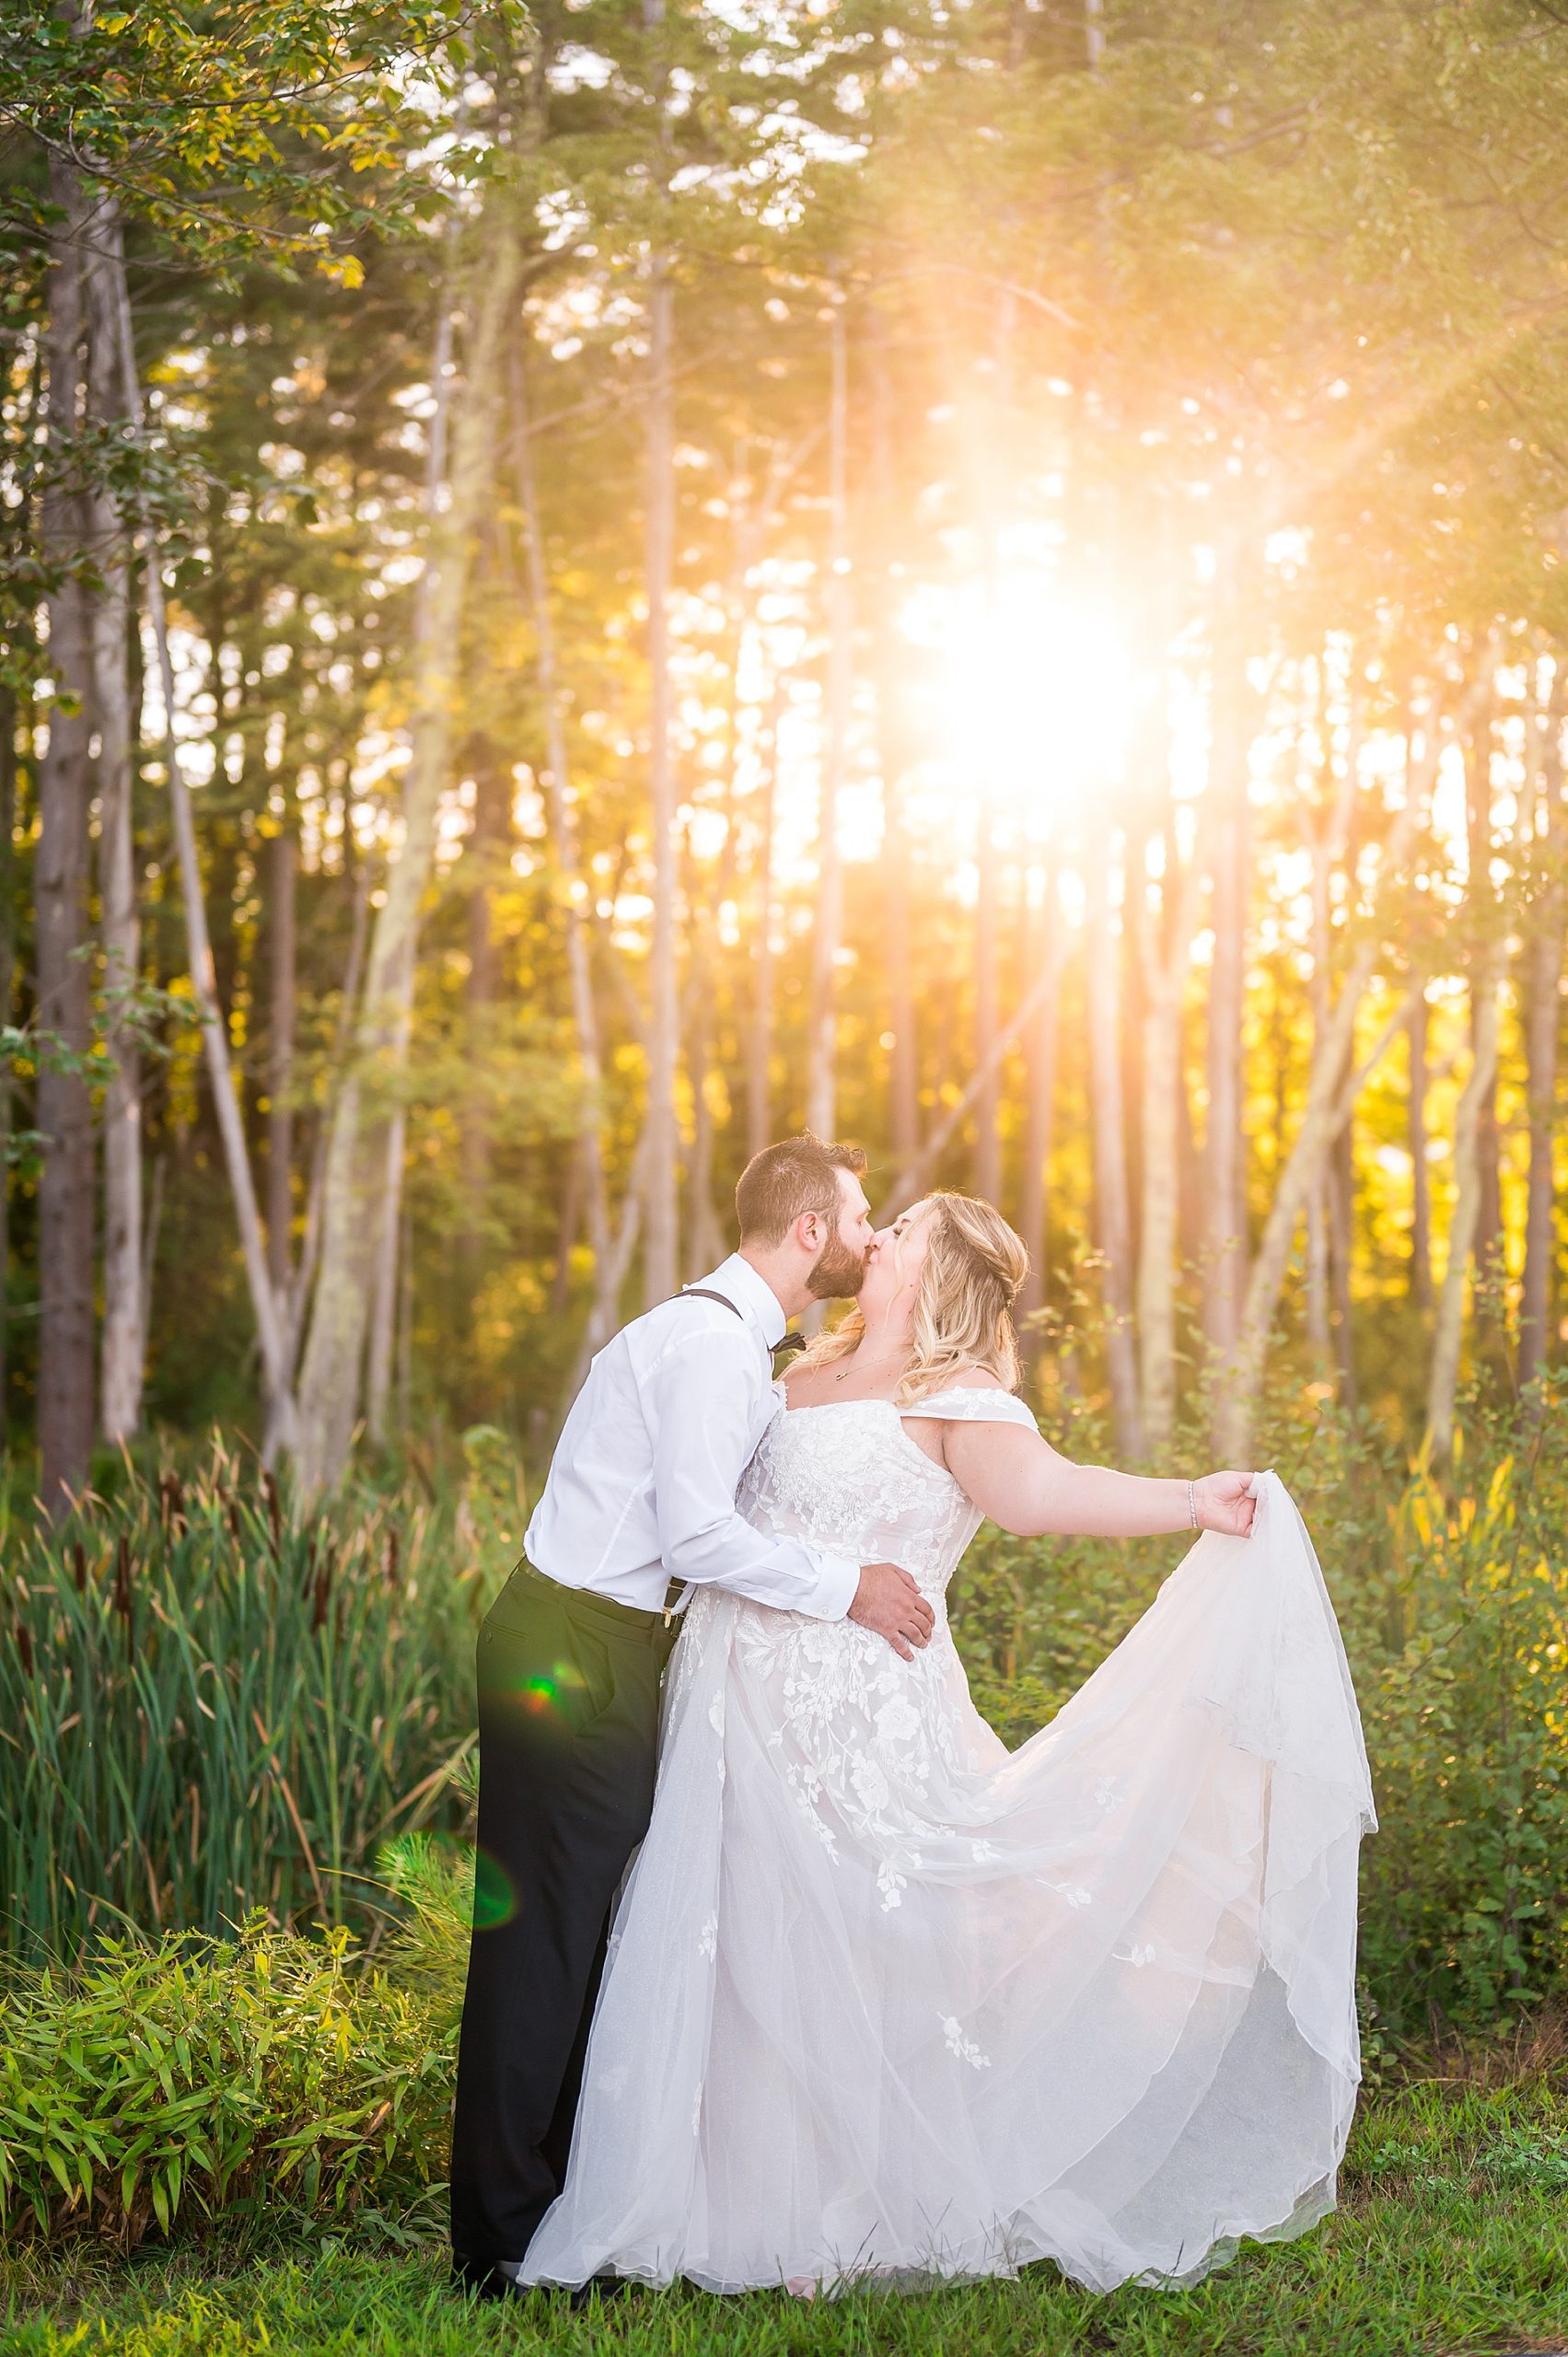 Light and airy wedding portraits during the golden hour